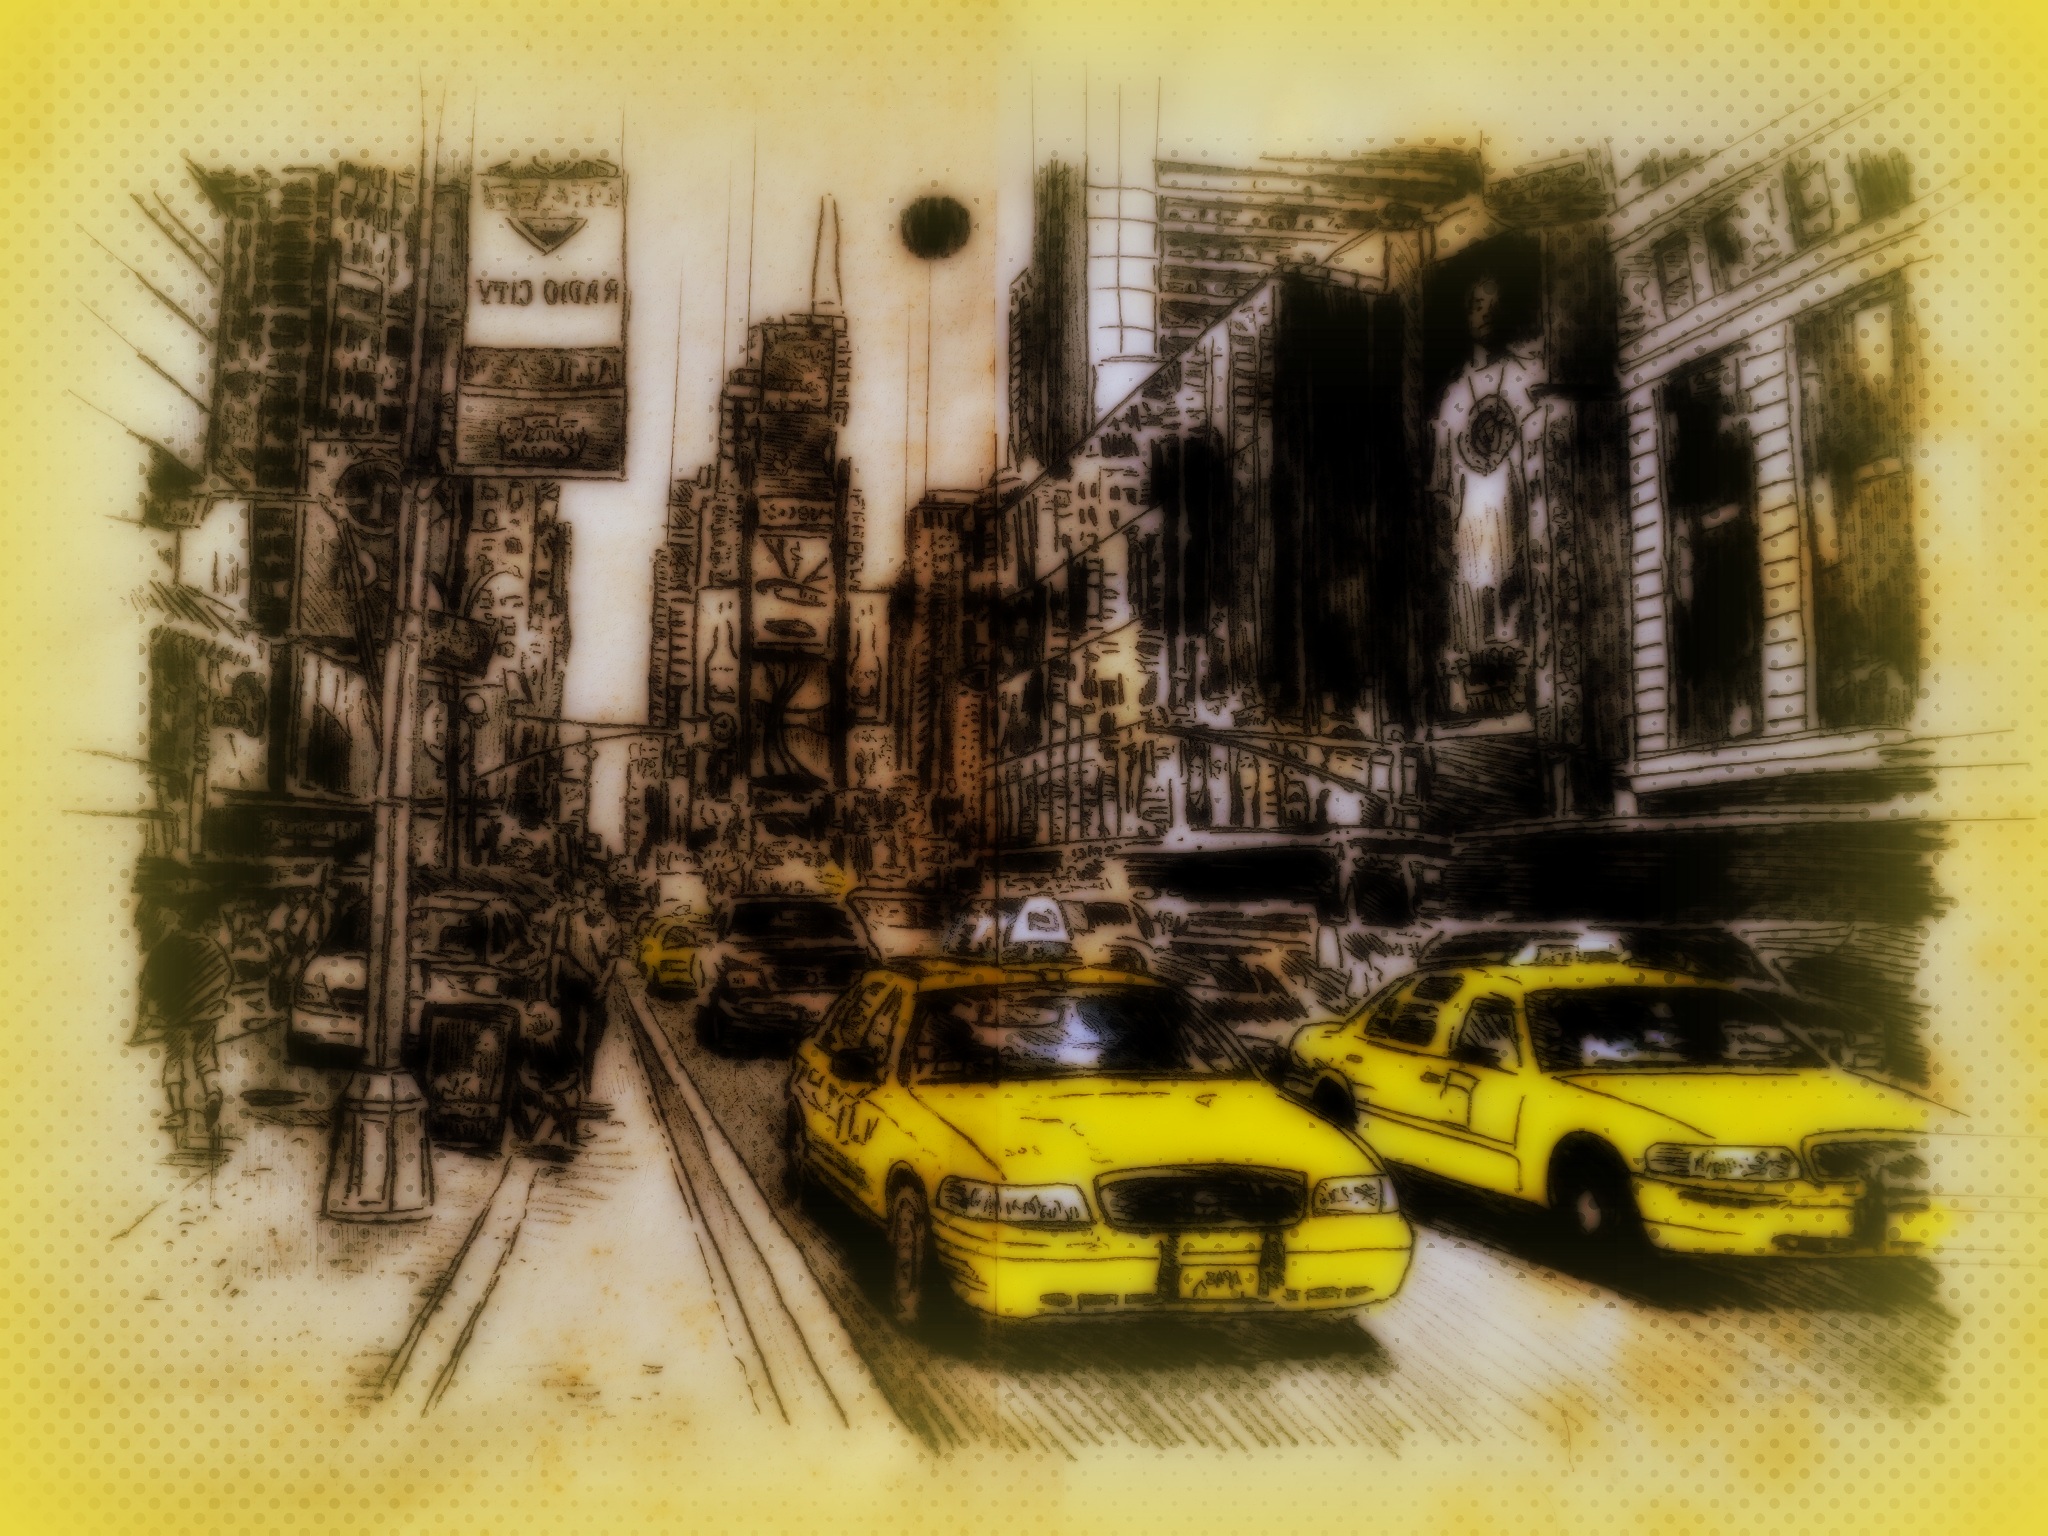 cabs in NYC, from rearview mirror